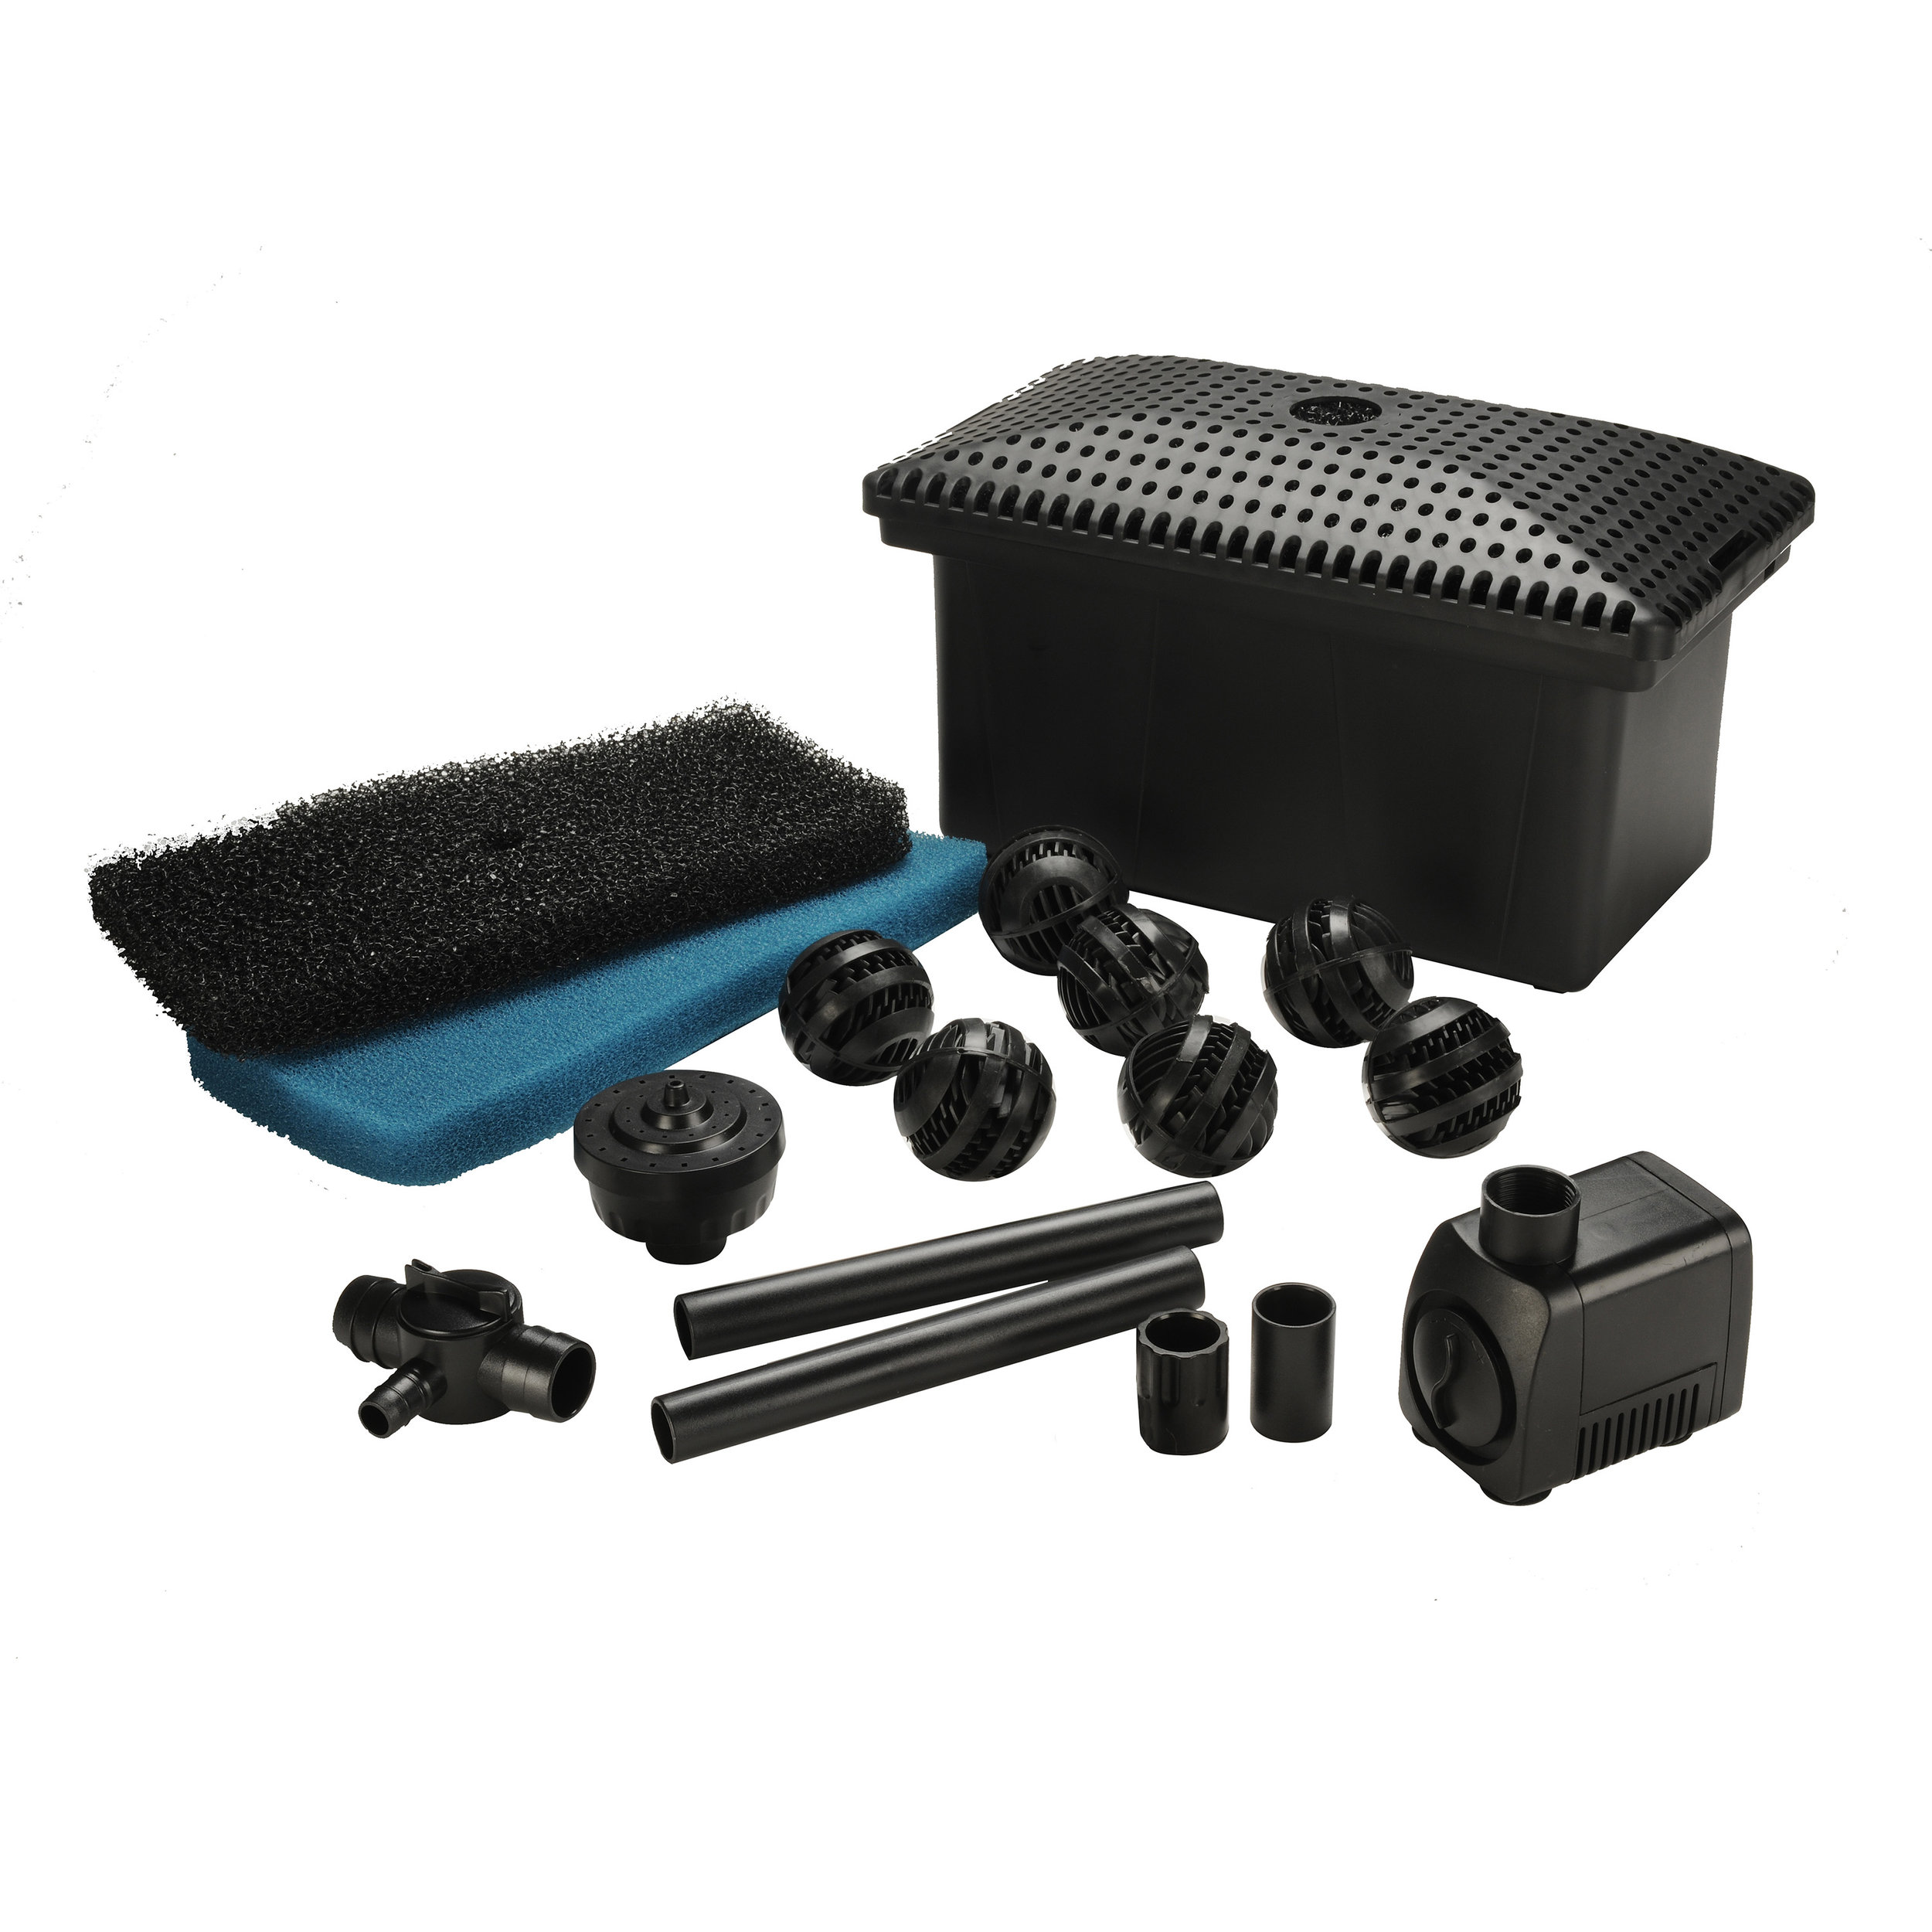 Filter Kit with Pump